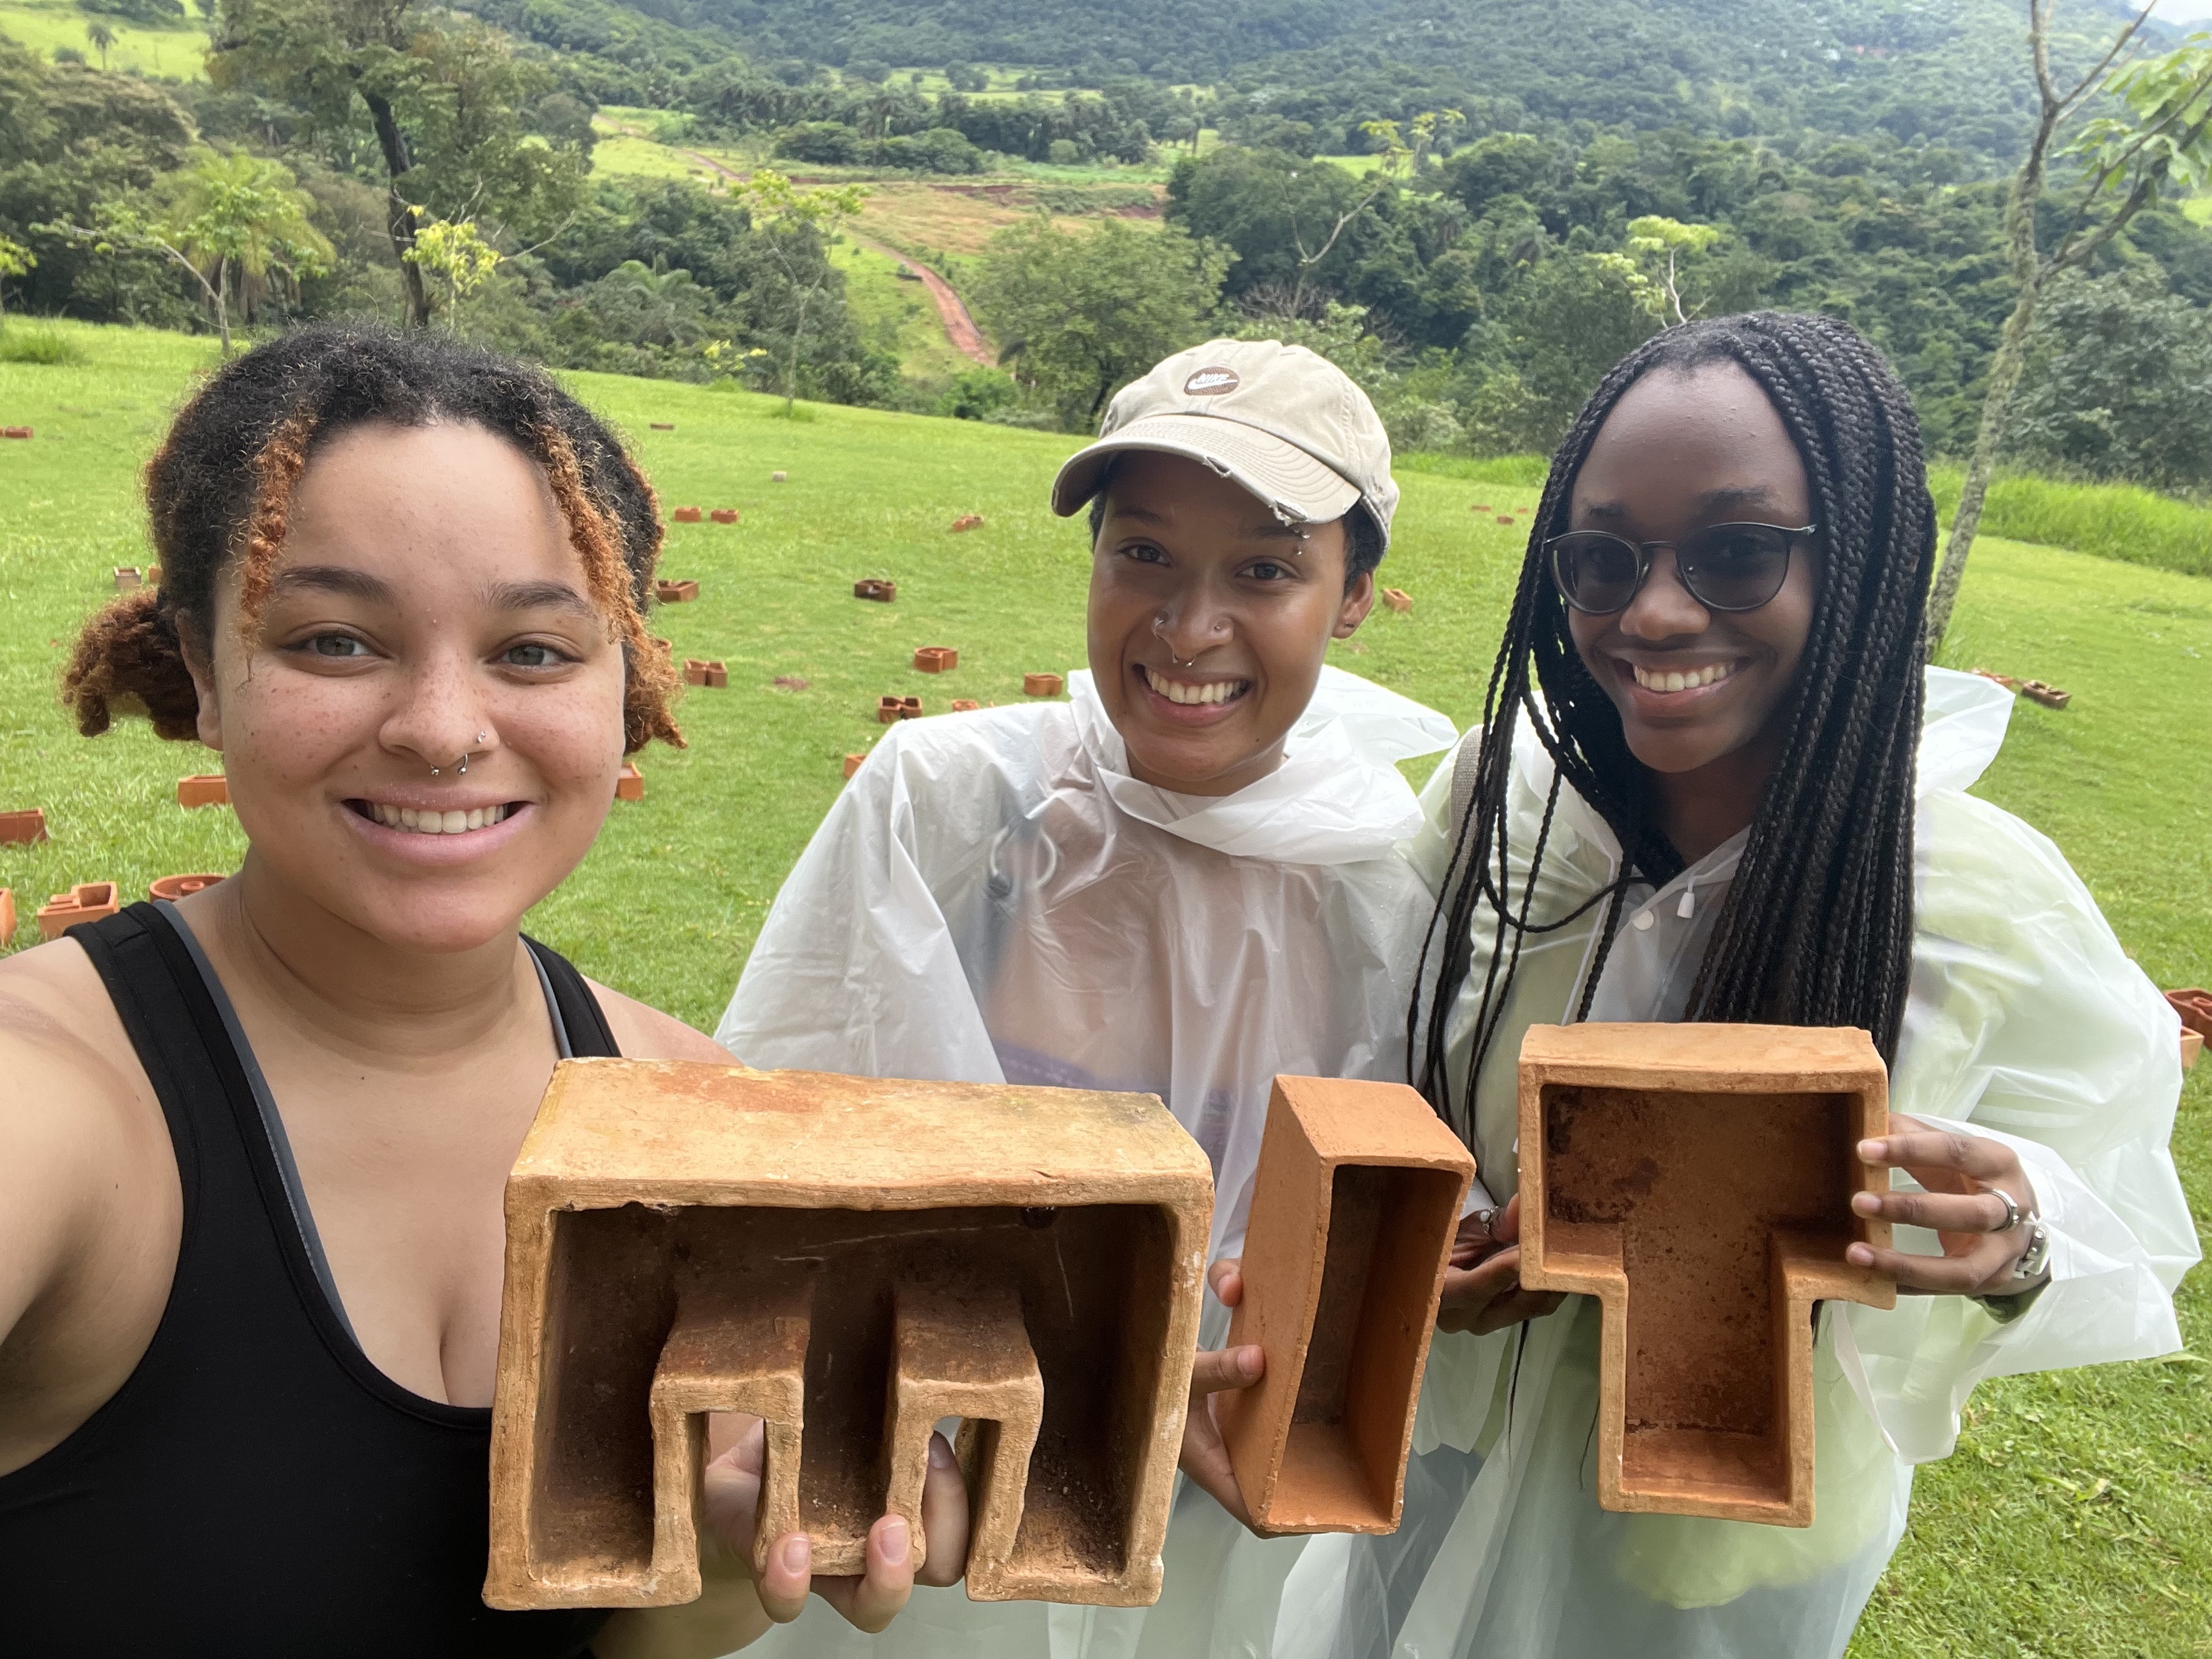 Students crafted terra cotta "MIT" letters and display them in a grassy forested area in Brazil